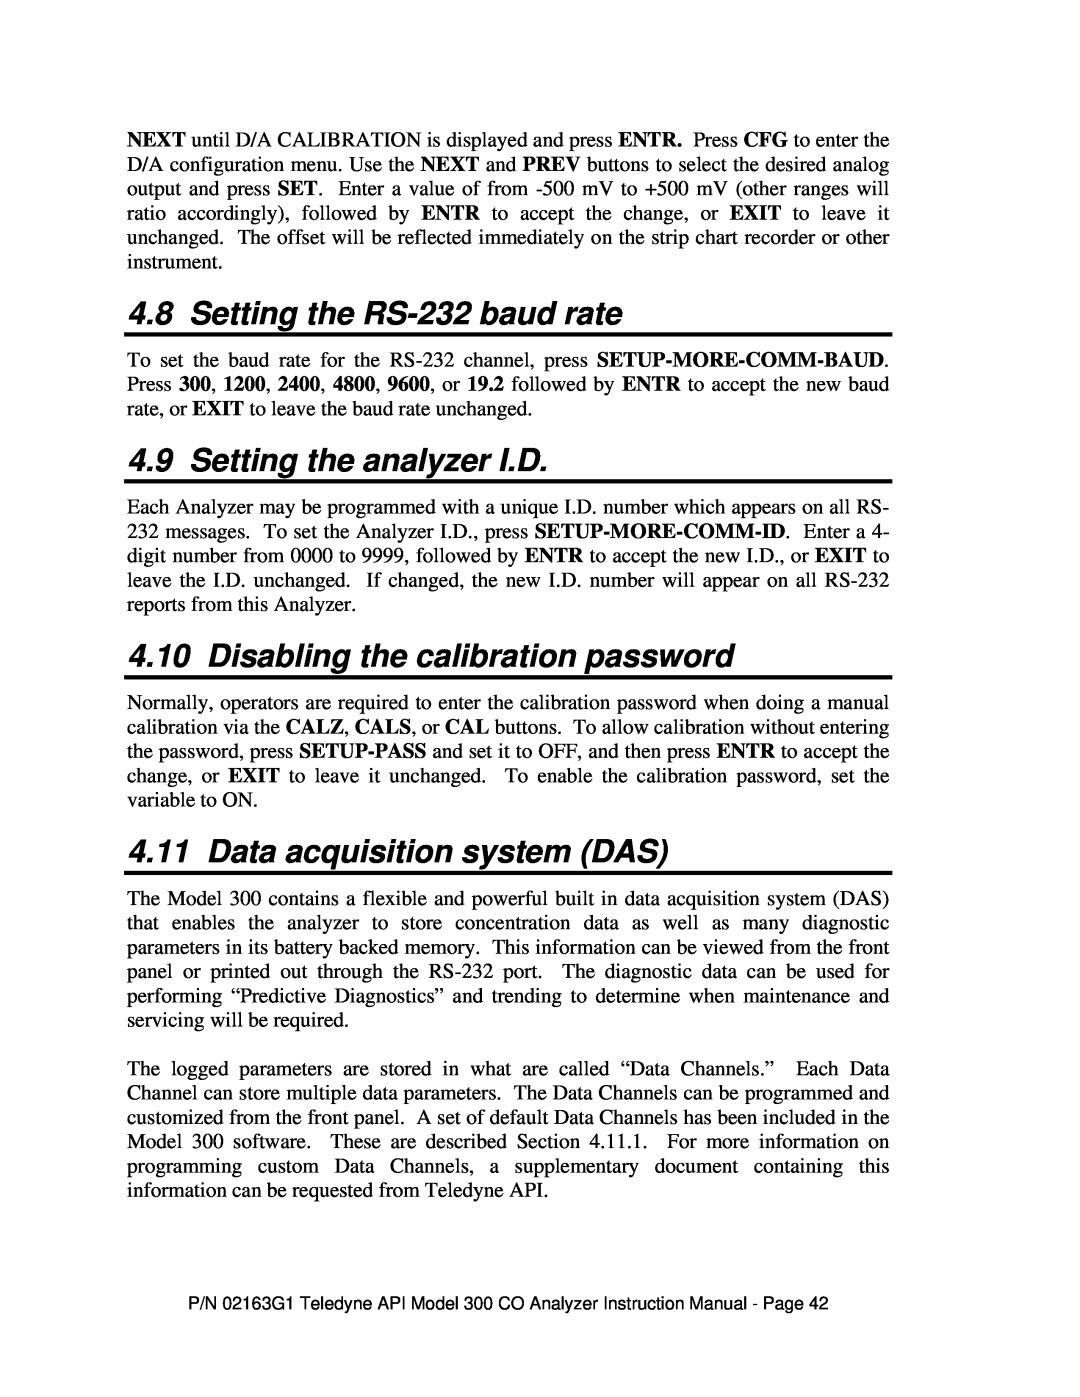 Teledyne 300 instruction manual Setting the RS-232baud rate, Setting the analyzer I.D, Disabling the calibration password 